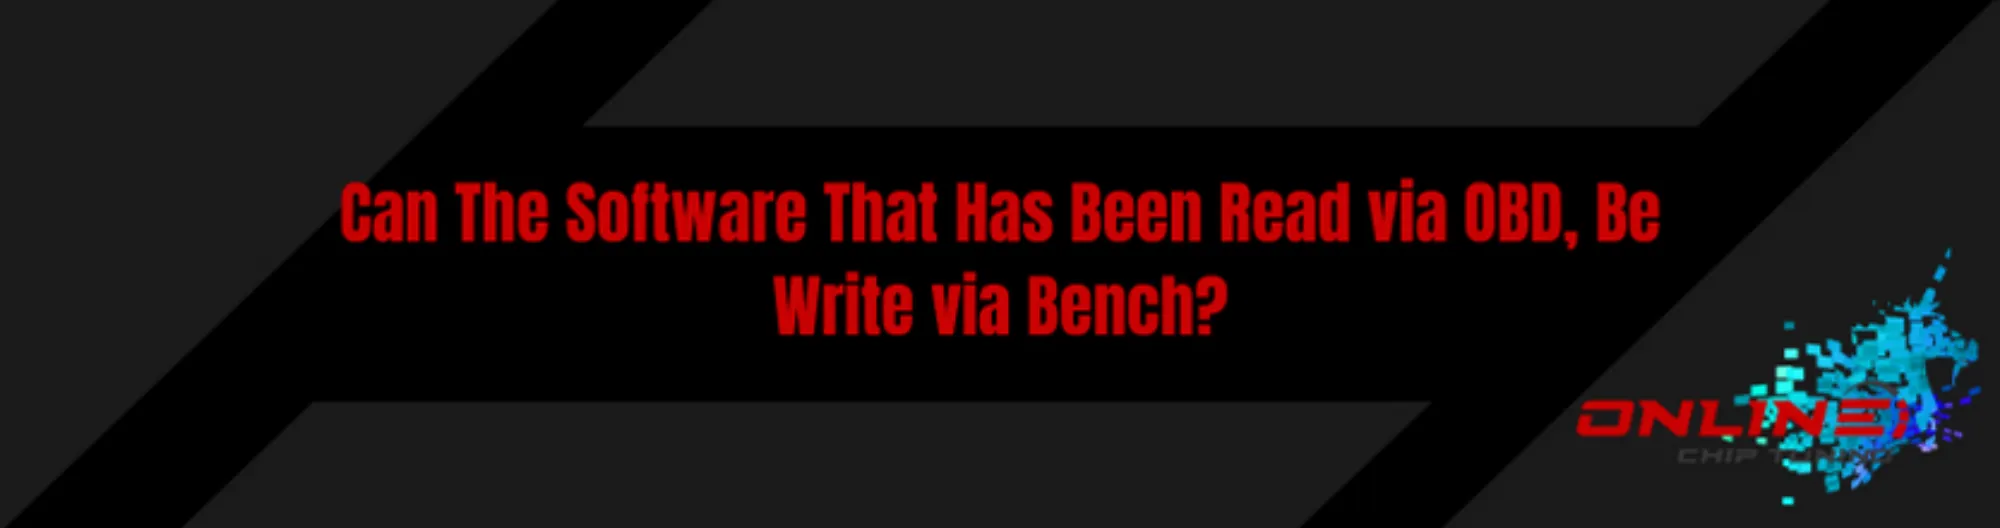 Can The Software That Has Been Read via OBD, Be Write via Bench?